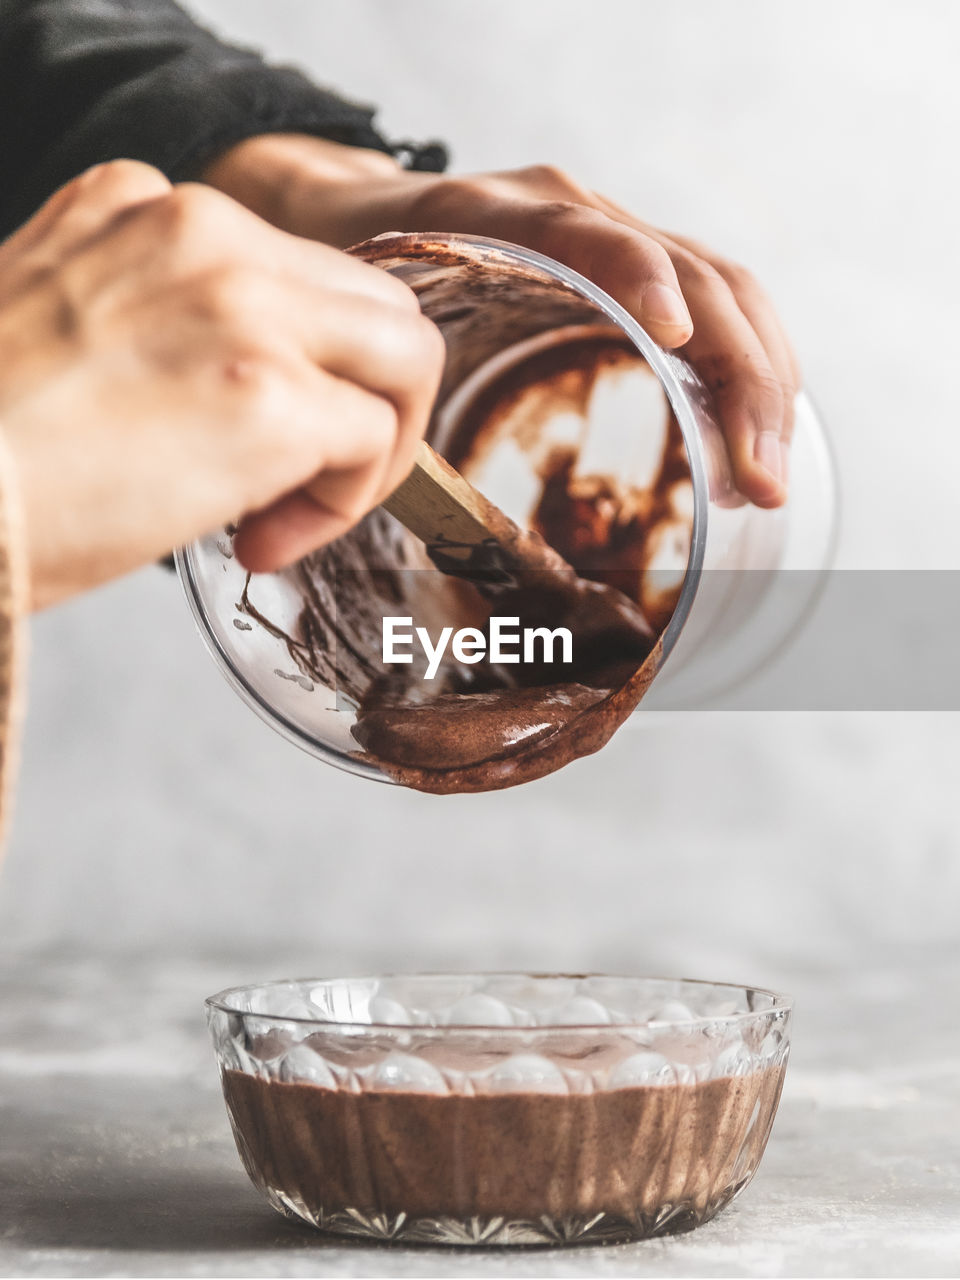 Close-up of hand holding bowl of chocolate mousse batter pouring into glass bowl